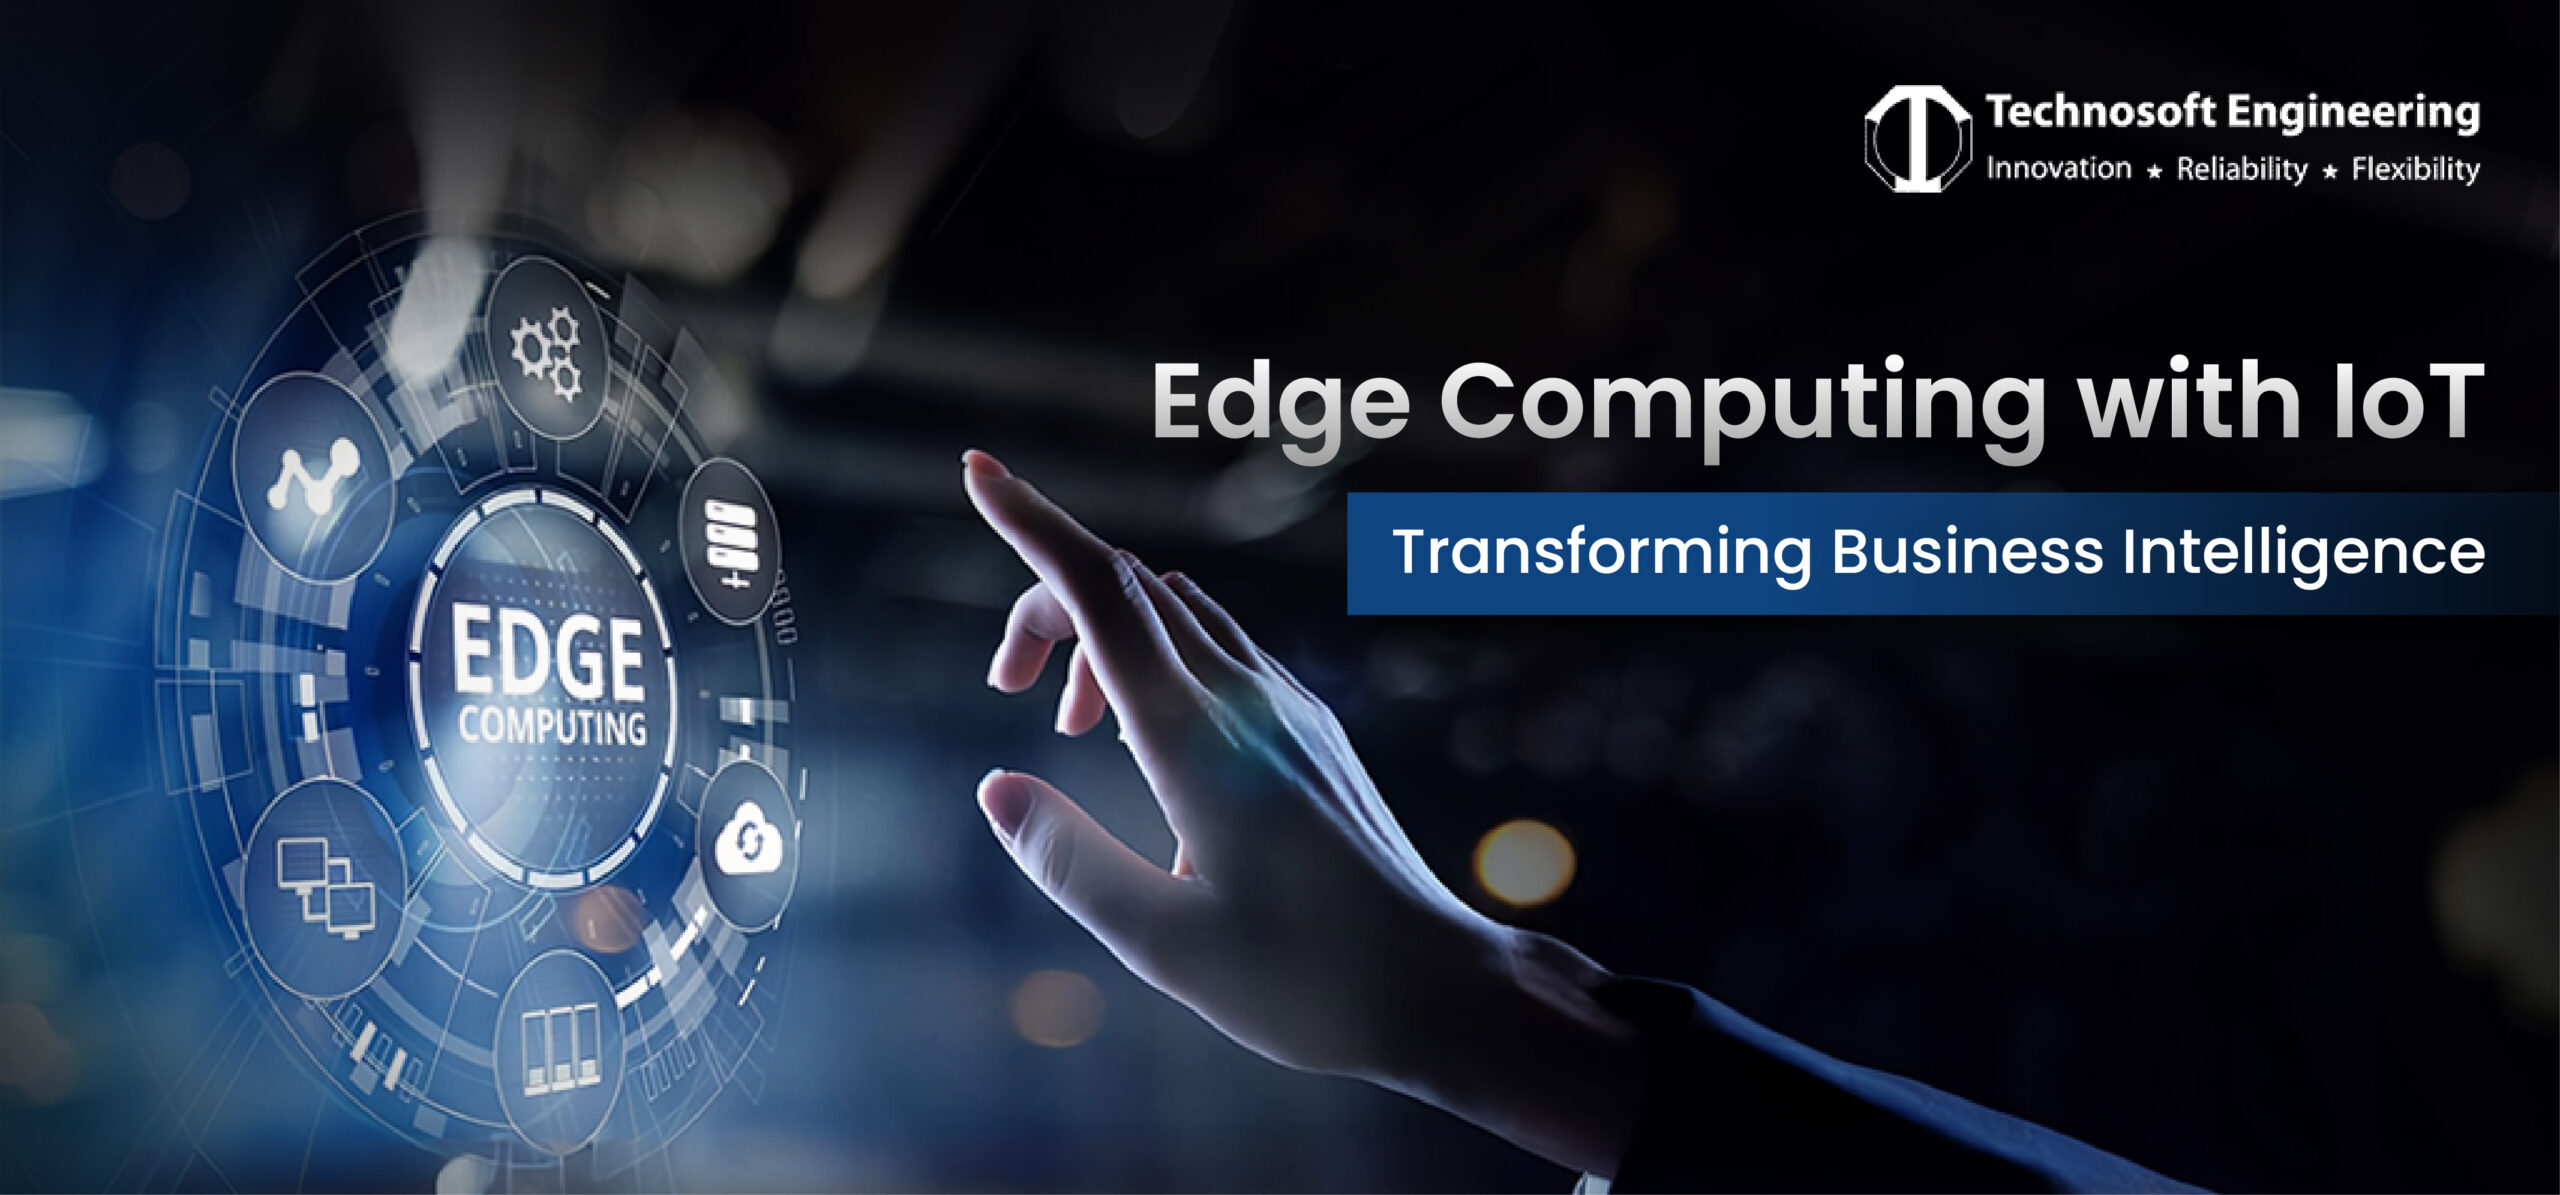 Edge Computing with IoT – Transforming Business Intelligence